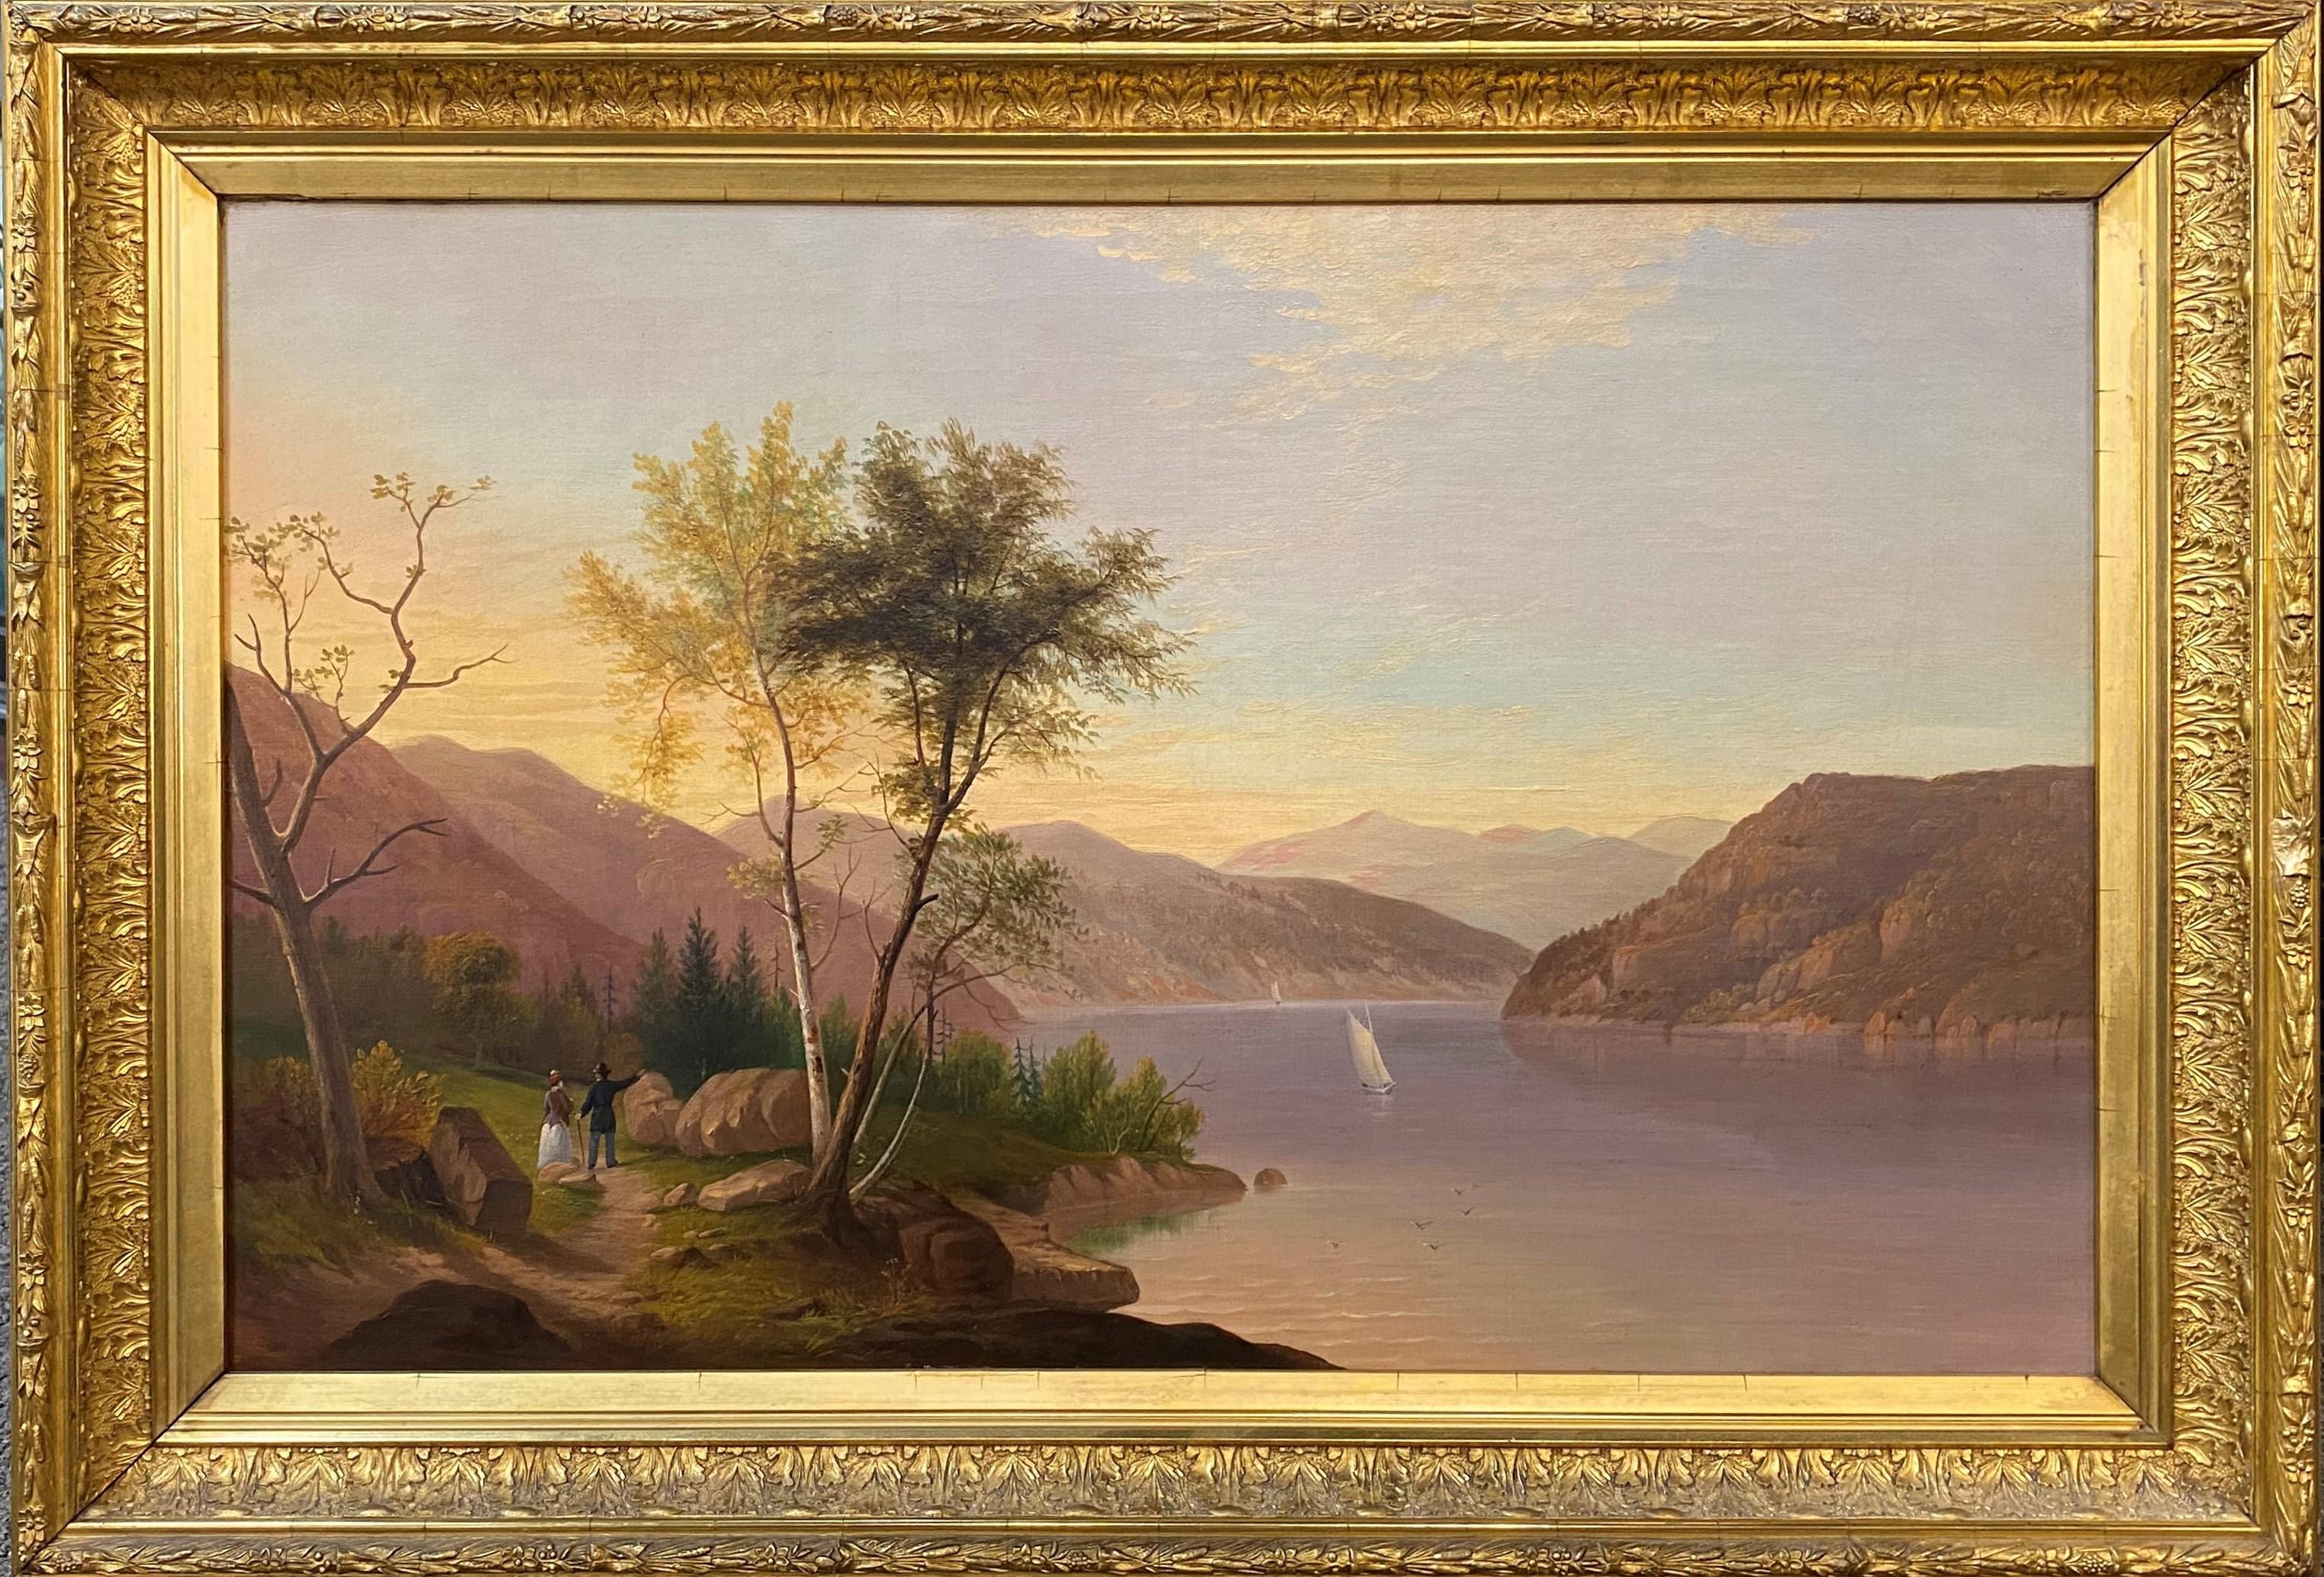 19th century American School Landscape Painting - Sunset over Lake George